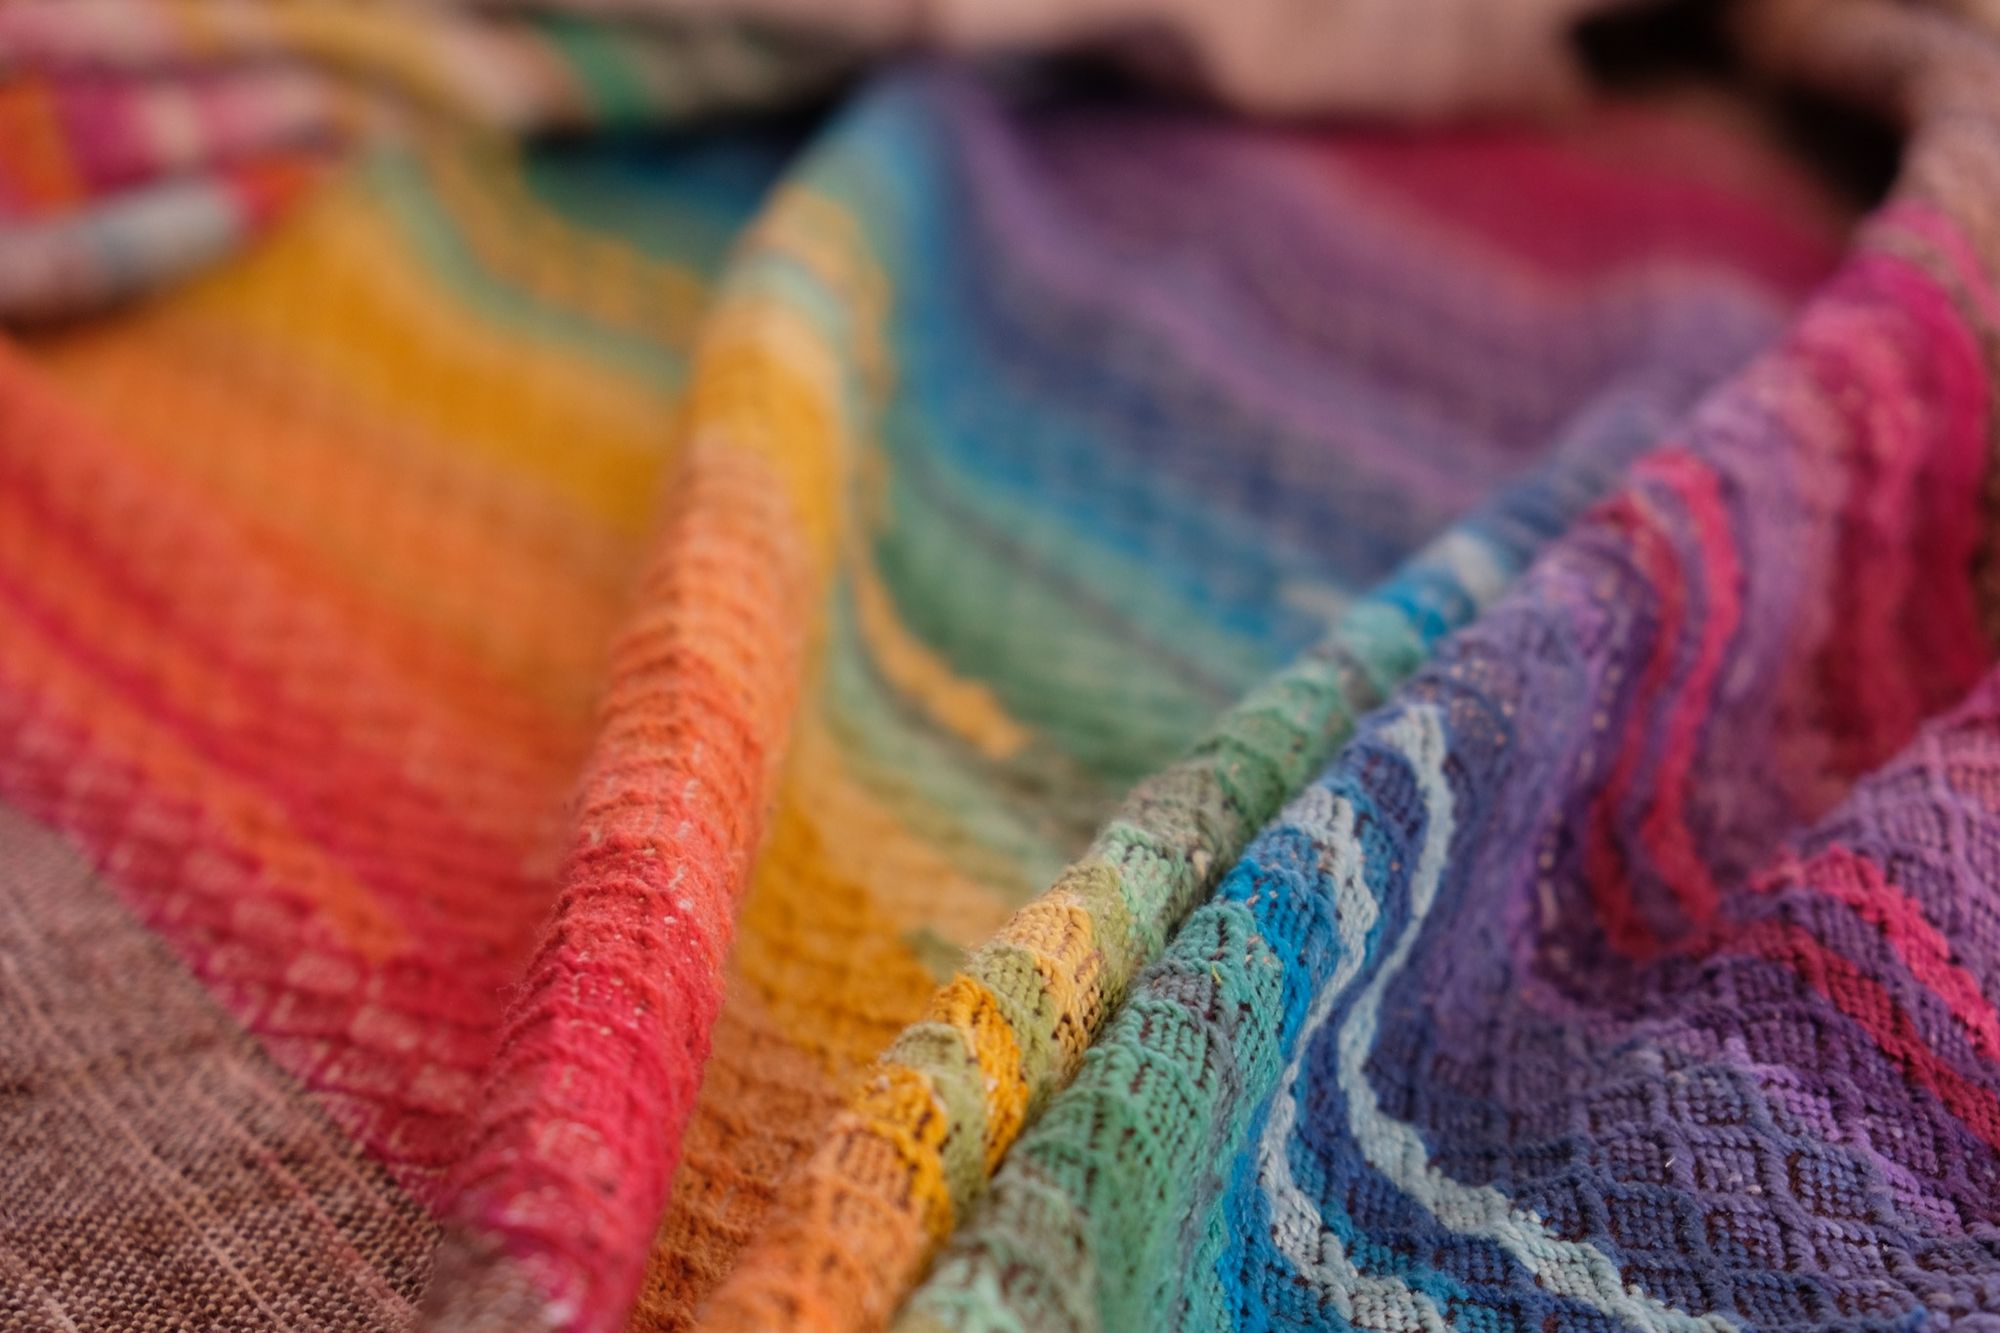 detail of handwoven fabric with textured diamond weave in rainbow colors with browns and tans